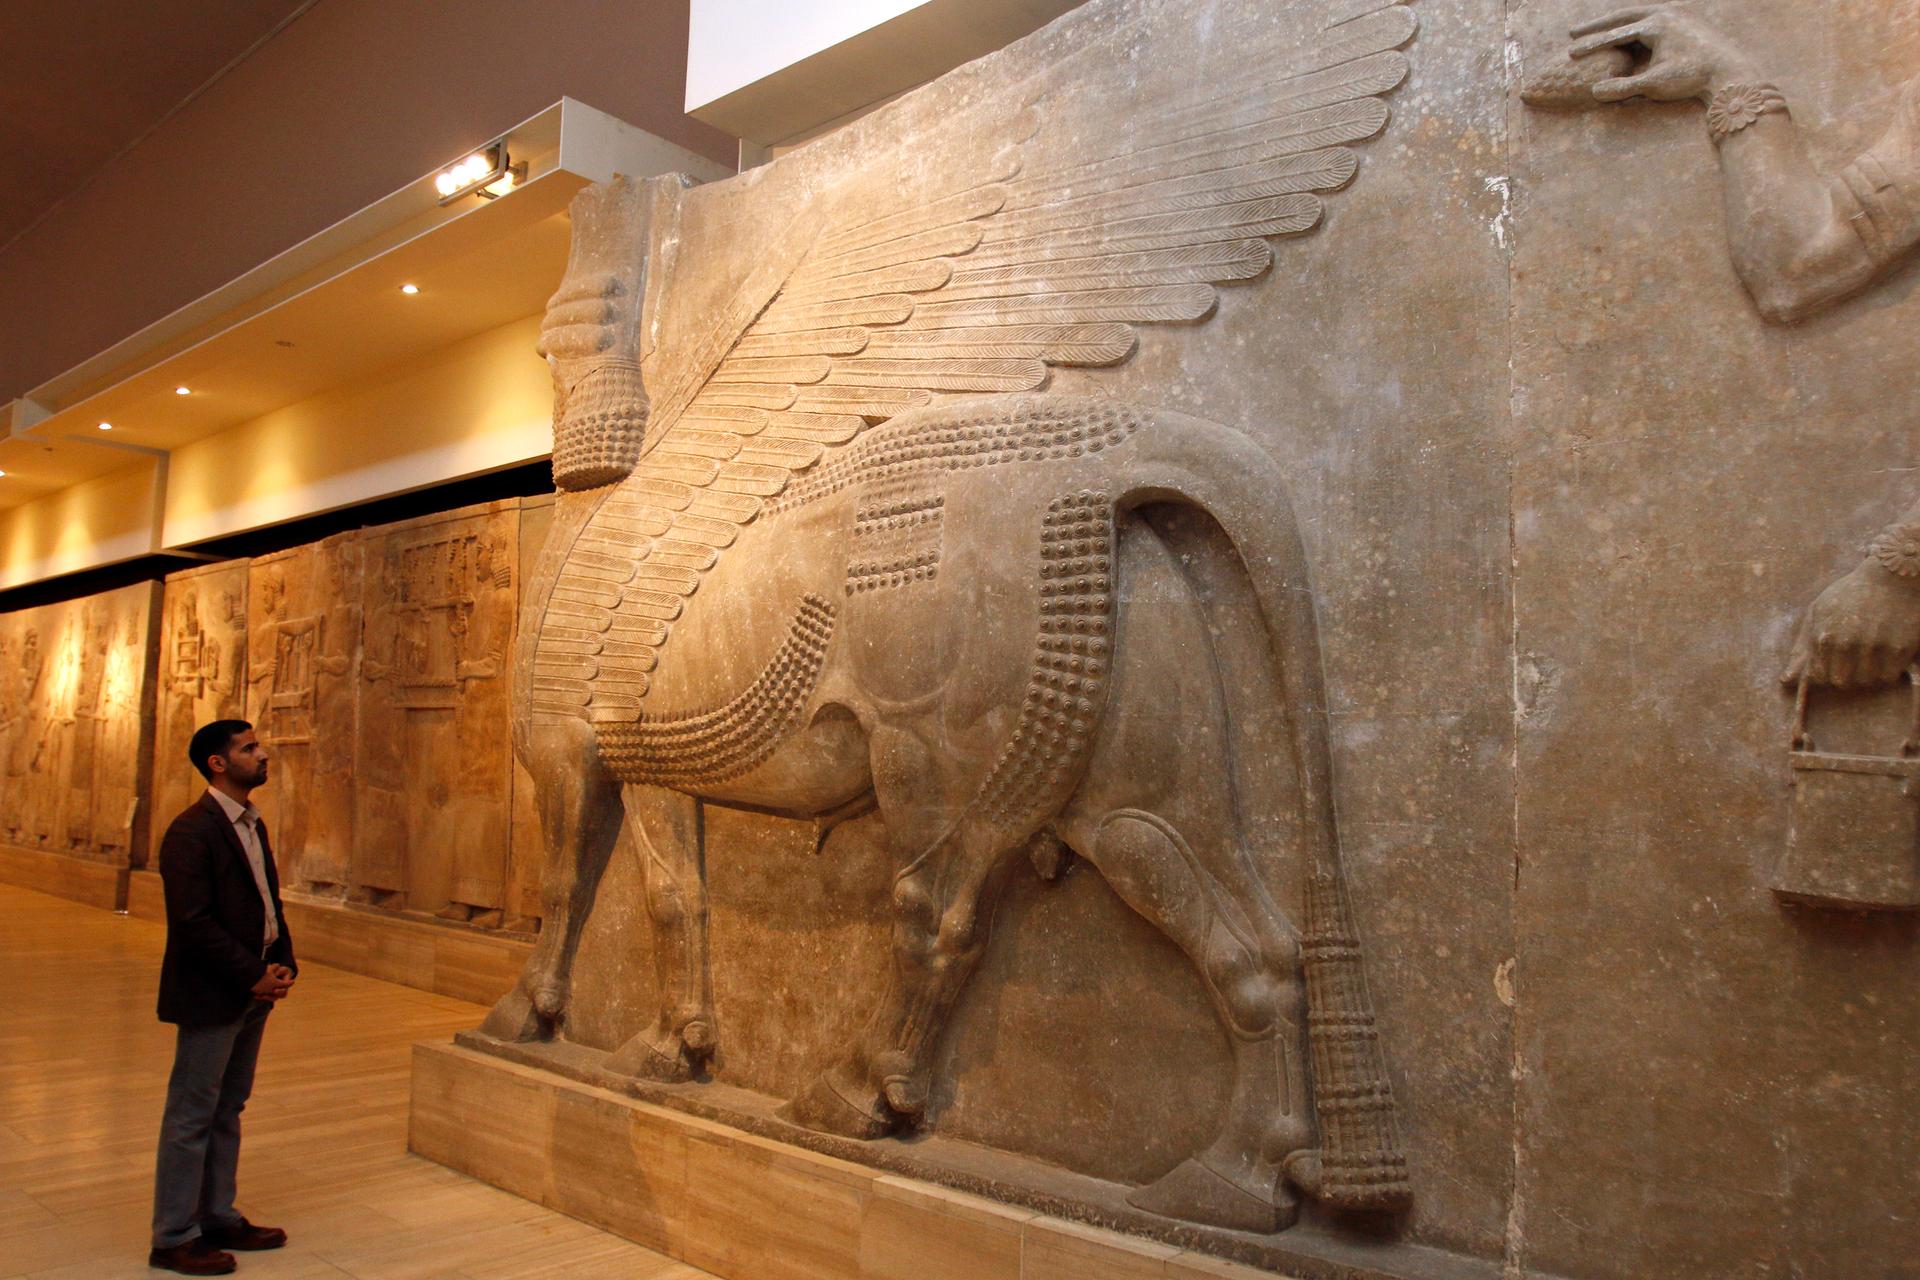 A man looks at an ancient Assyrian statue of a winged bull with a human head at the Iraqi National Museum in Baghdad on February 28, 2015.